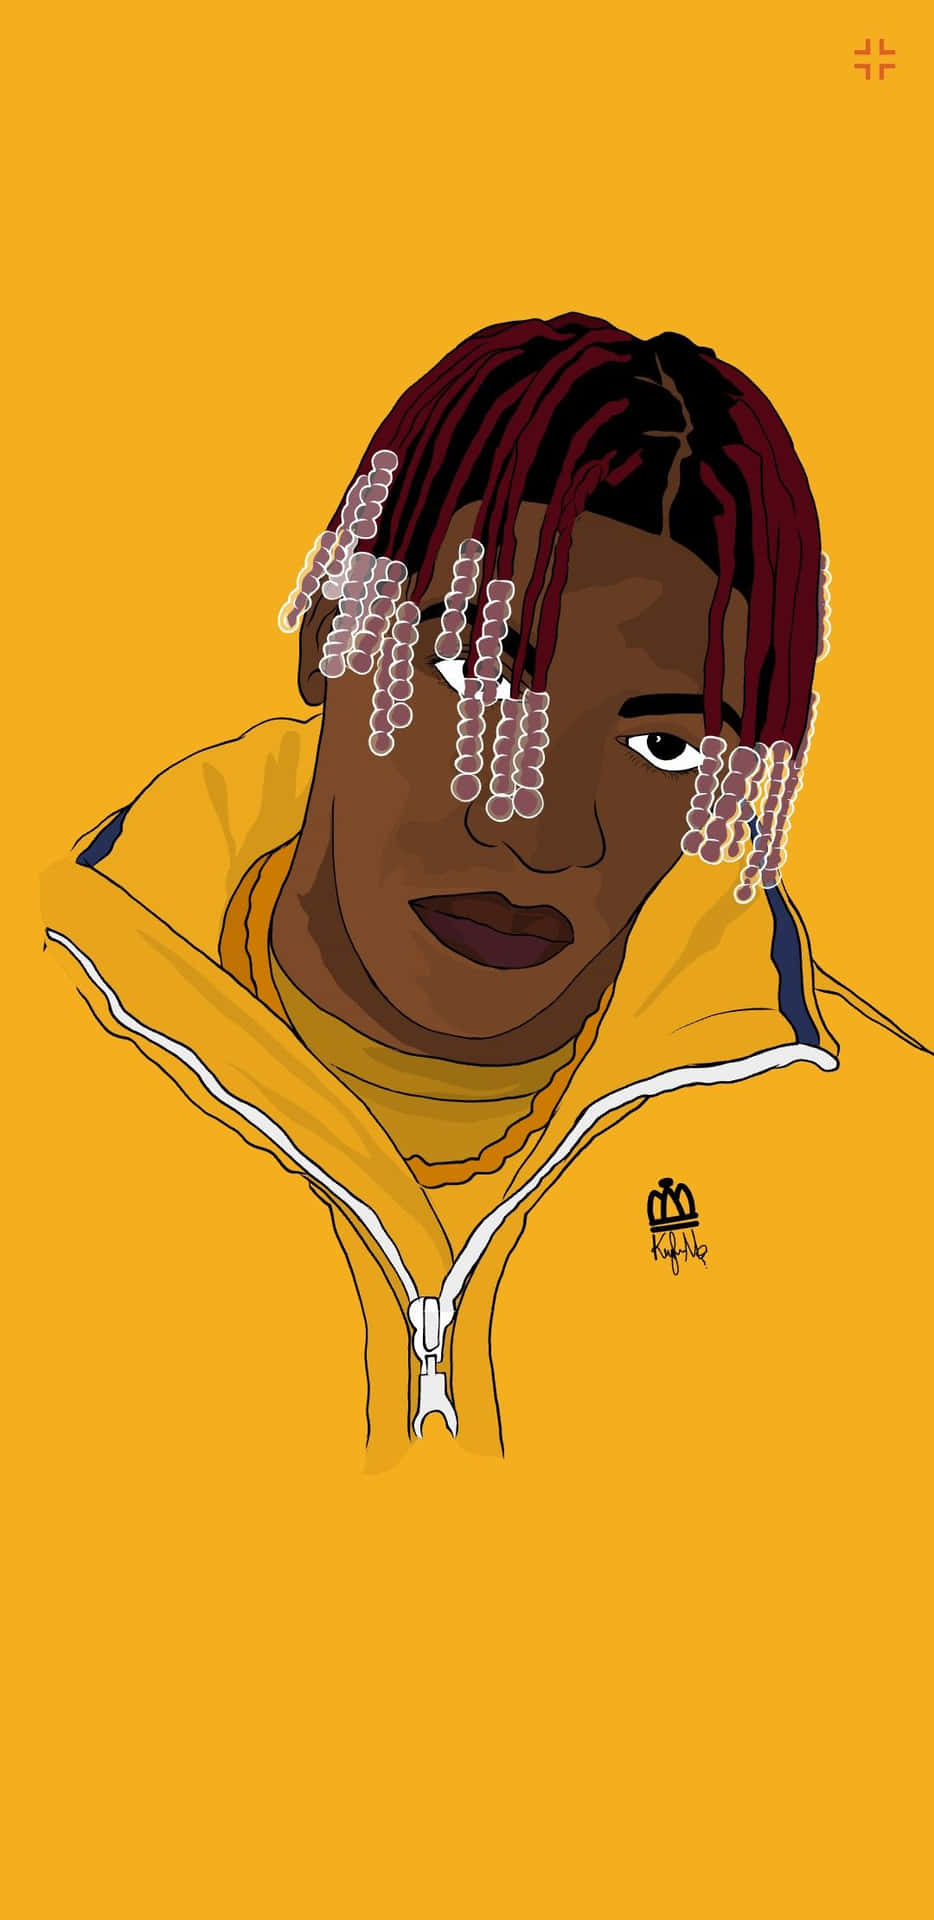 Rapper and singer Lil Yachty at a red carpet event Wallpaper